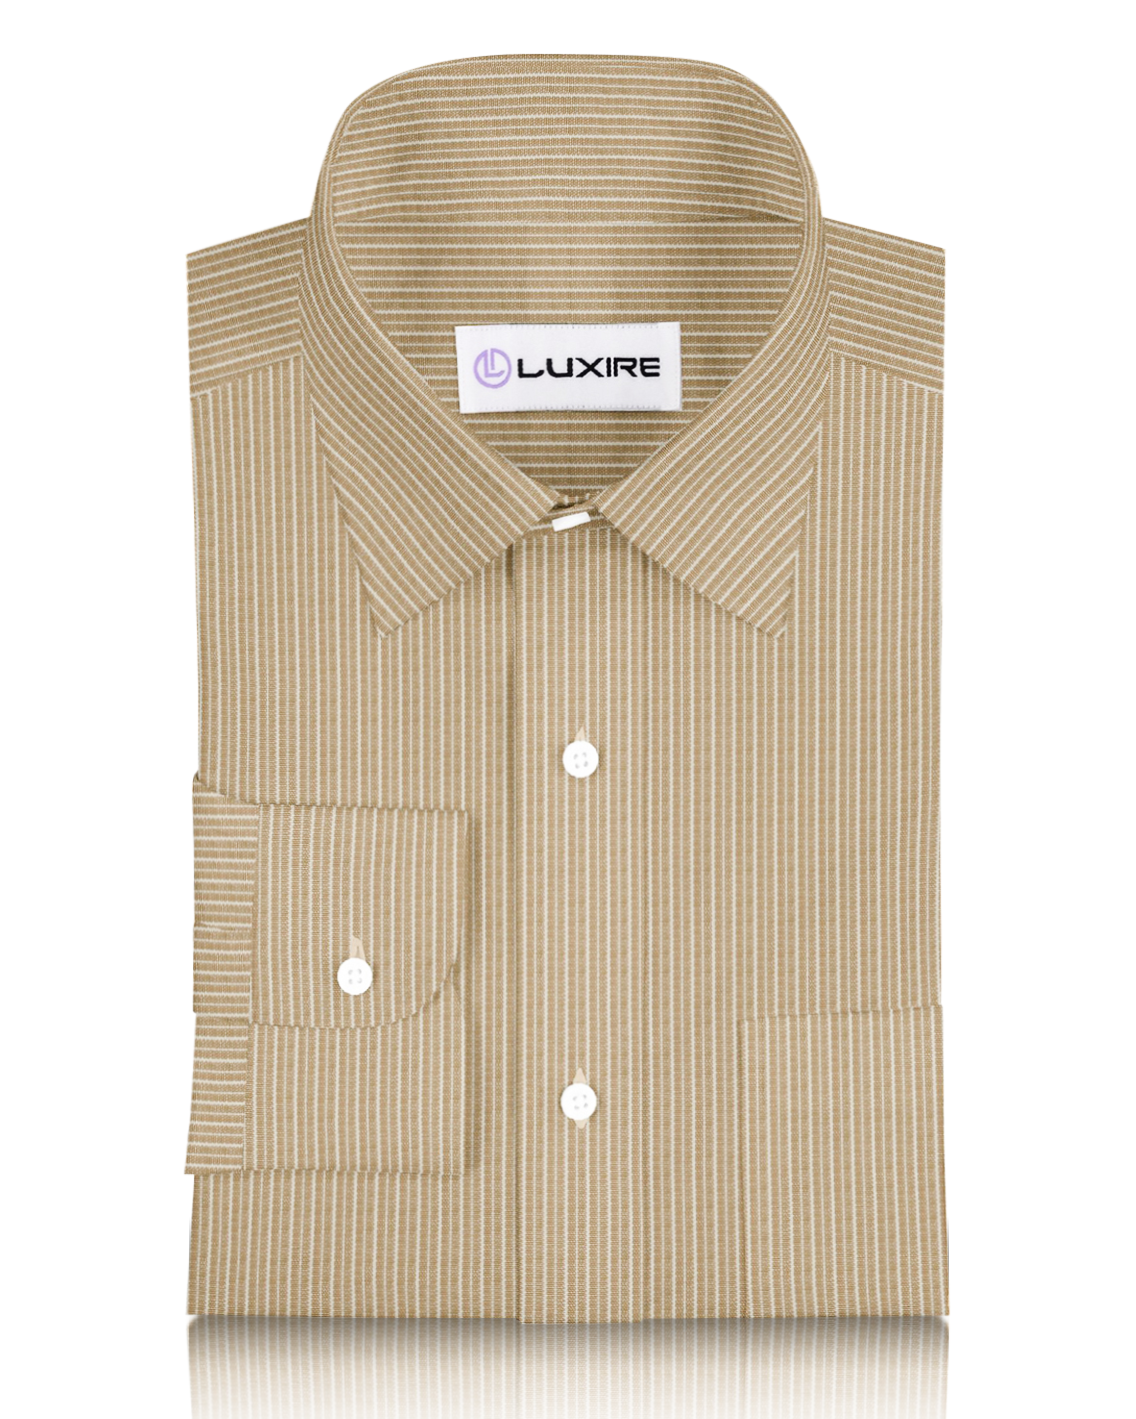 Front of the custom linen shirt for men in ecru with white stripes by Luxire Clothing